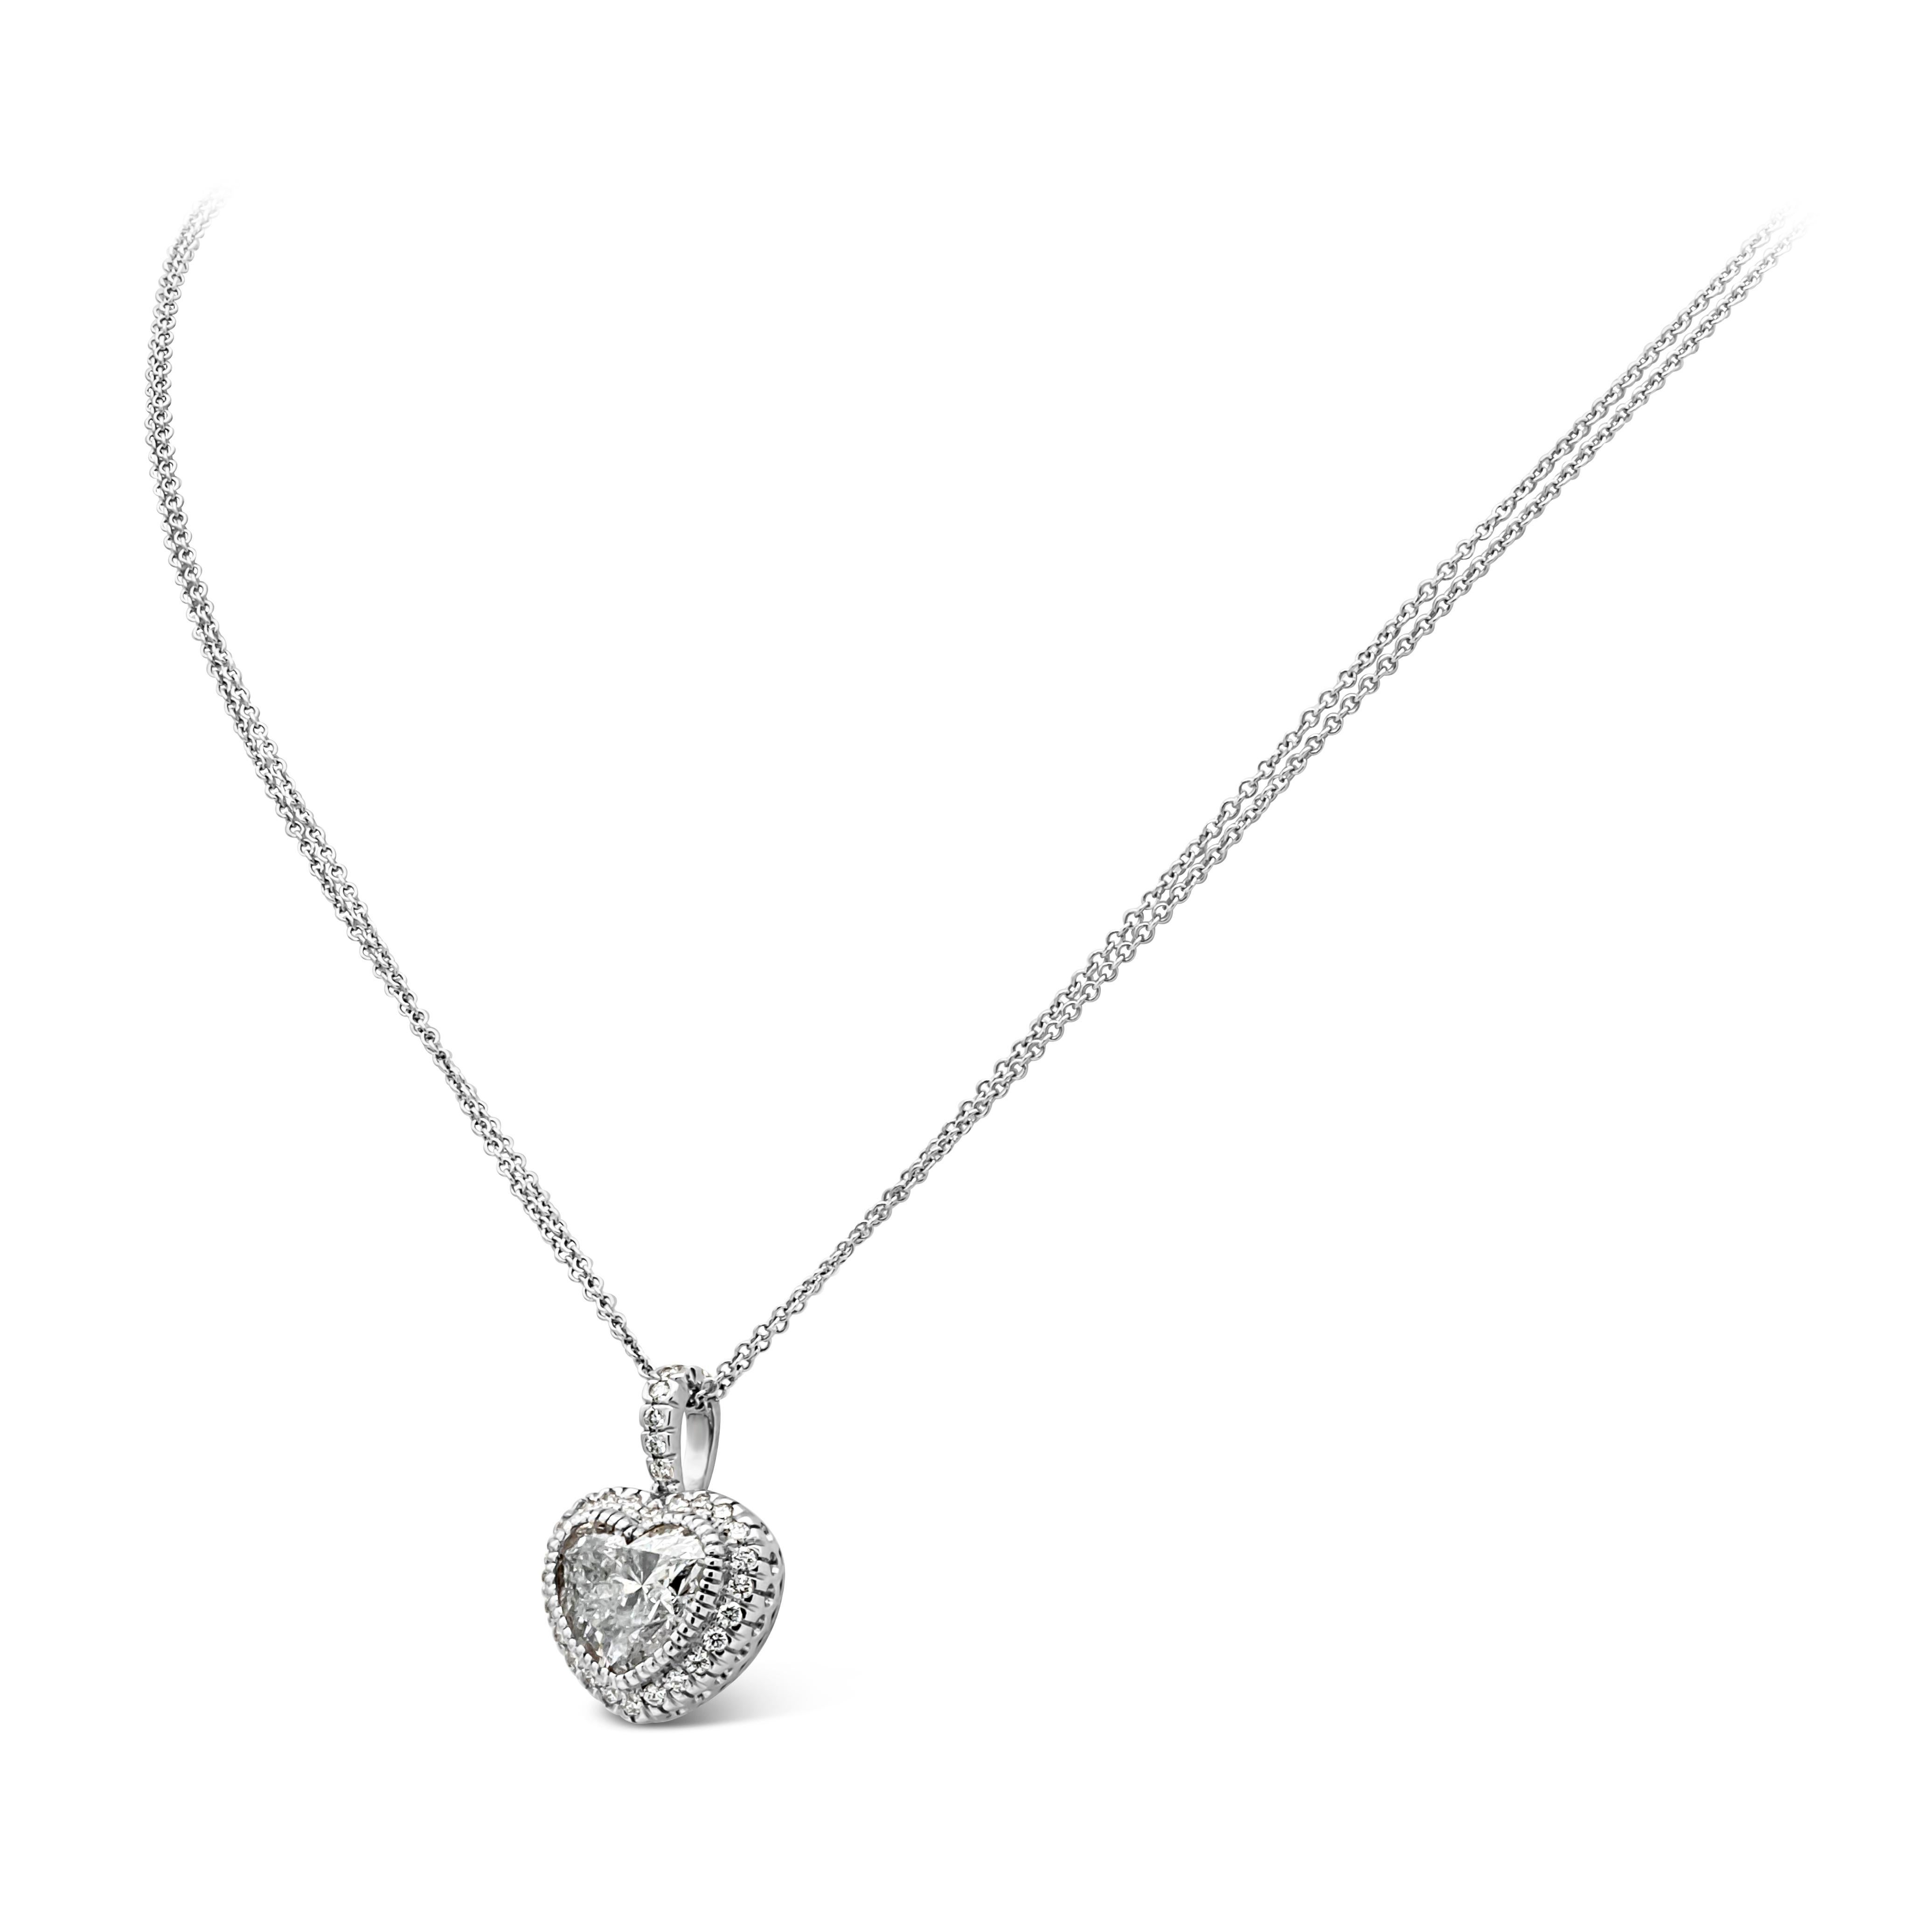 A beautiful and versatile pendant necklace showcasing a 3.05 carat heart shape diamond, E color and I2 in clarity in the center. Surrounded by a single row of brilliant round diamonds in a halo design weighing 0.31 carats total, and a diamond